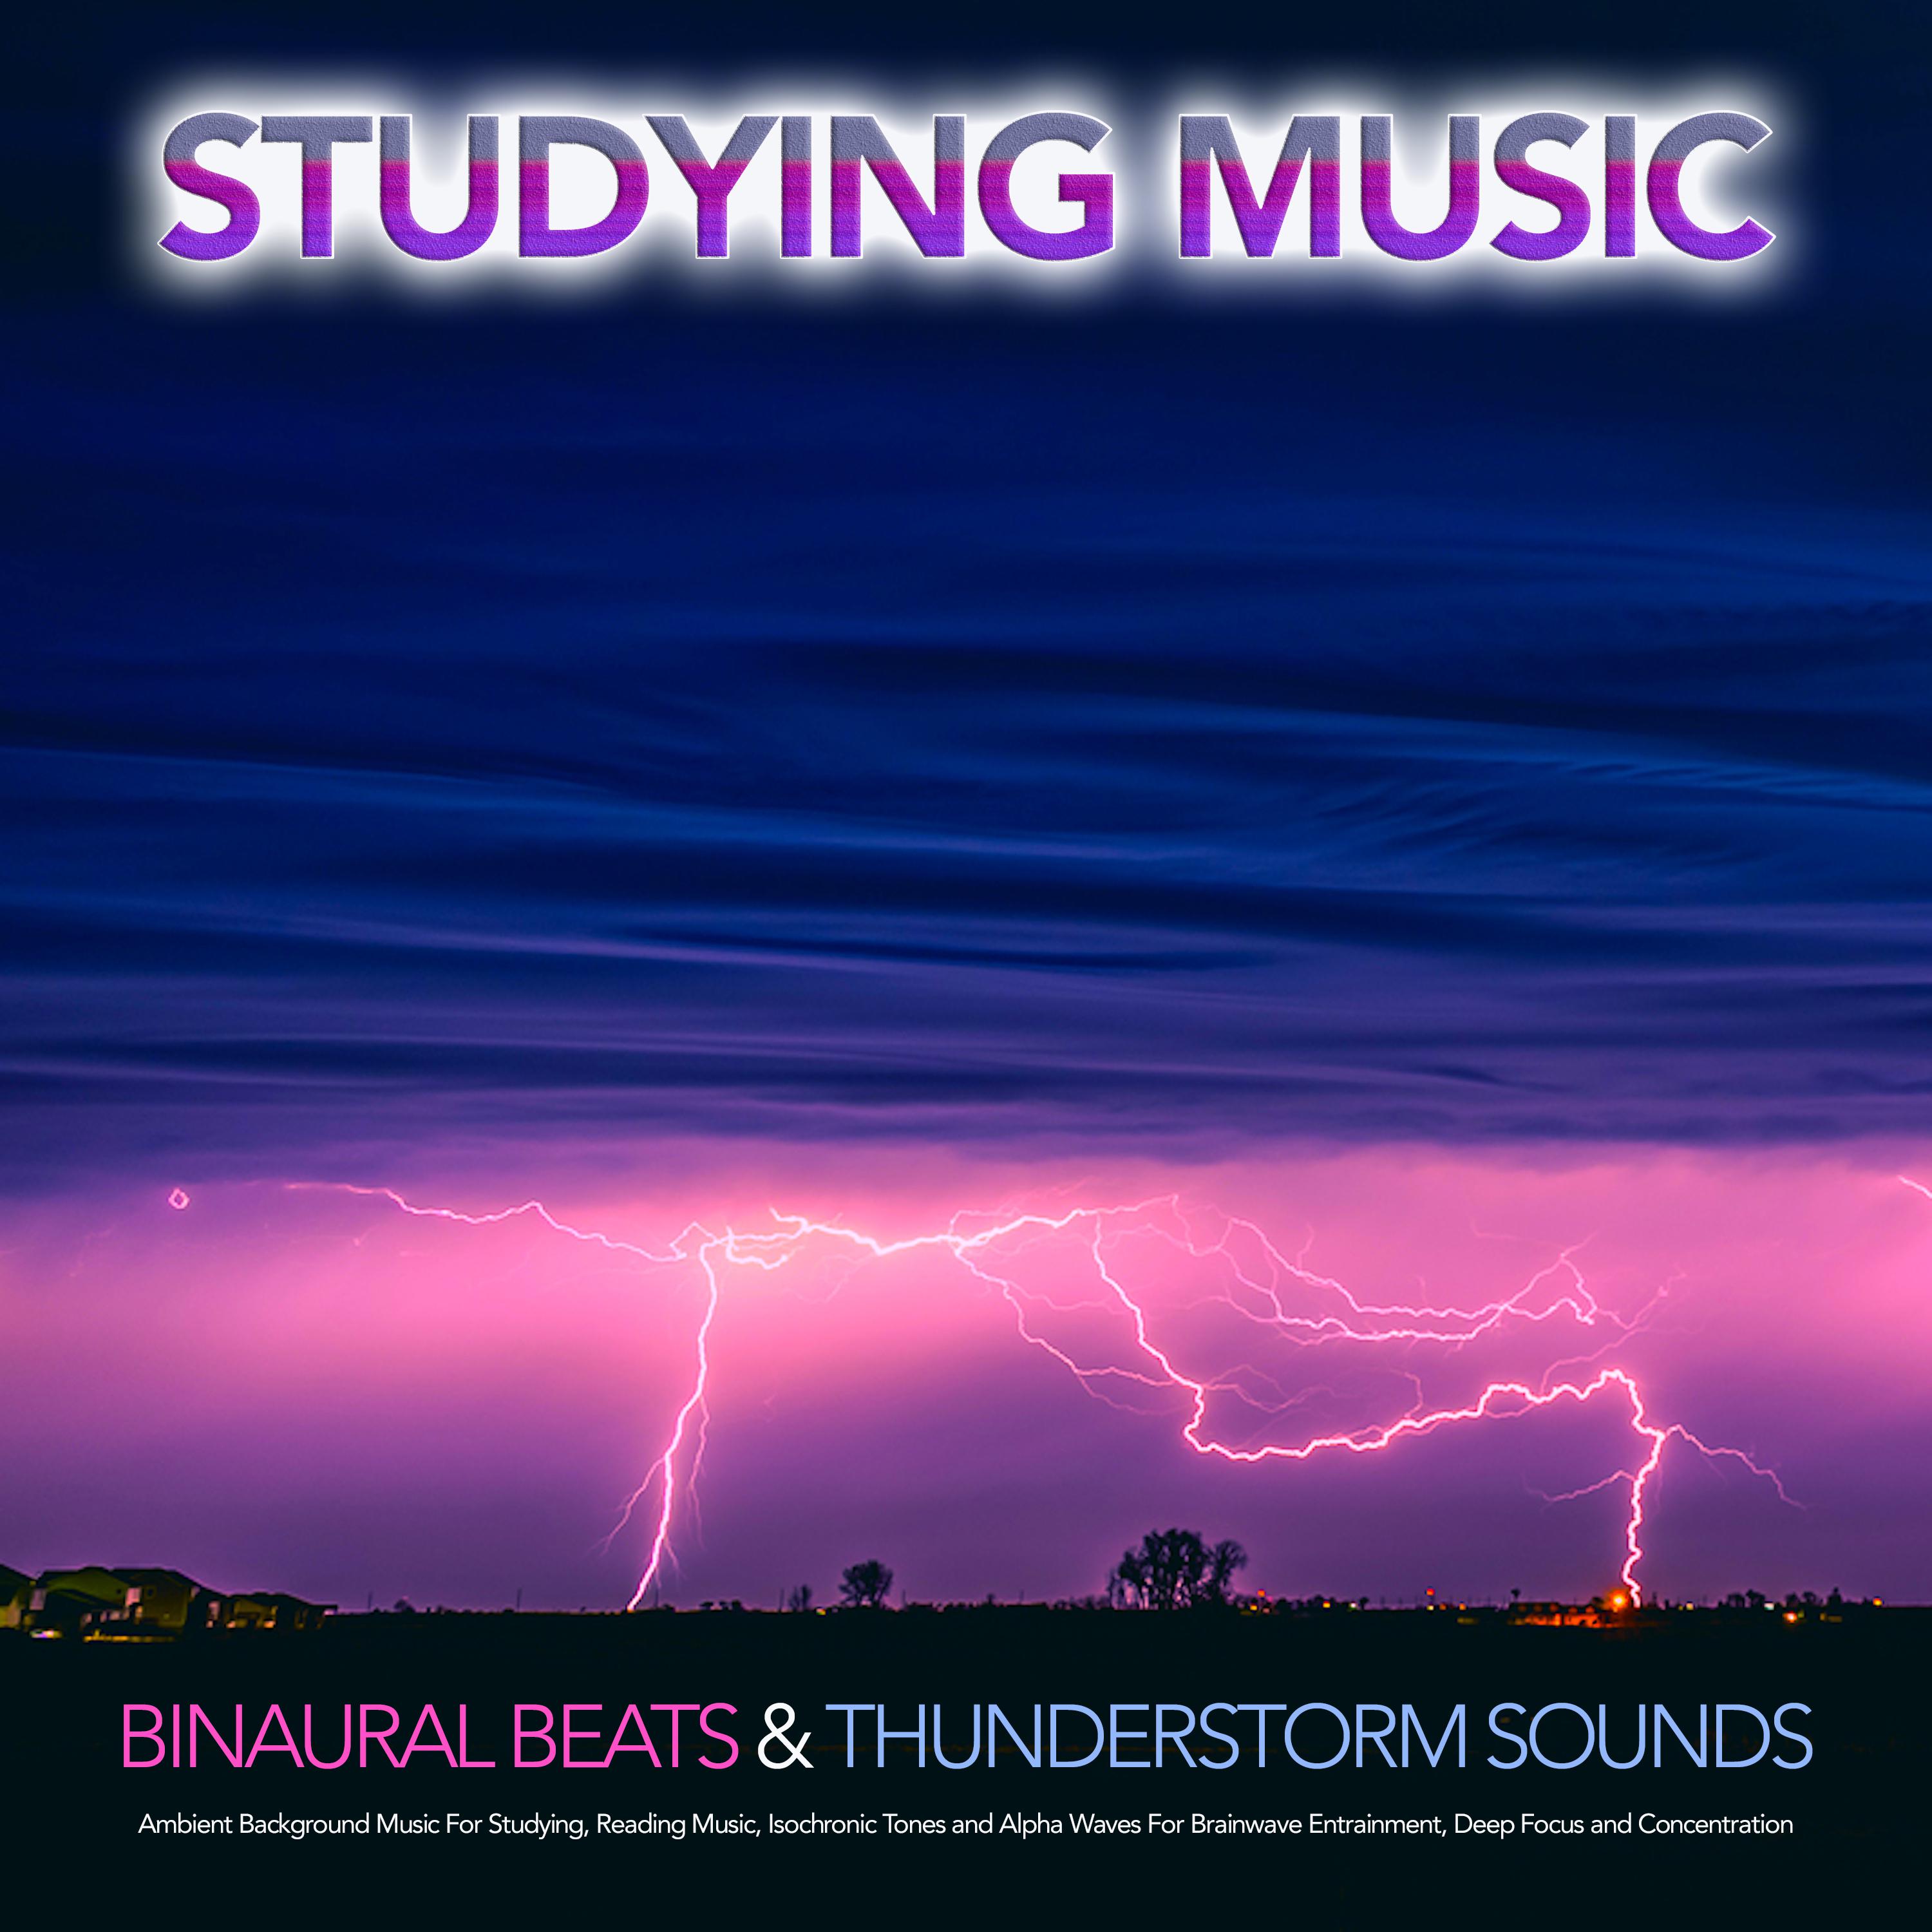 Studying Music: Binaural Beats and Thunderstorm Sounds, Ambient Background Music For Studying, Reading Music, Isochronic Tones and Alpha Waves For Brainwave Entrainment, Deep Focus and Concentration